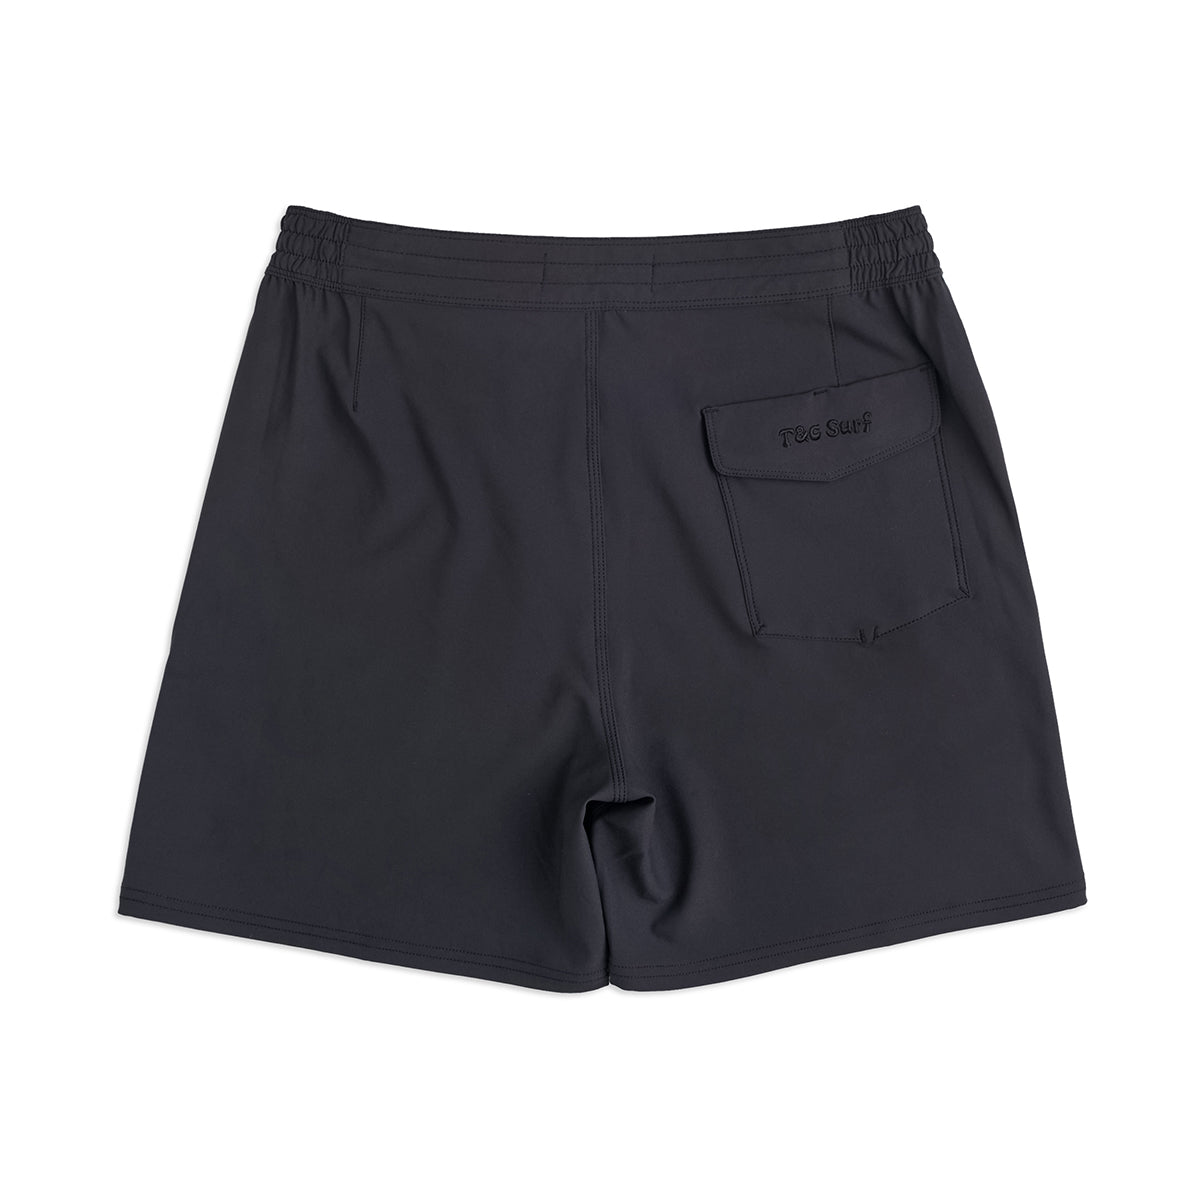 Easy Fit 17.5" Beach Shorts - Washed Black